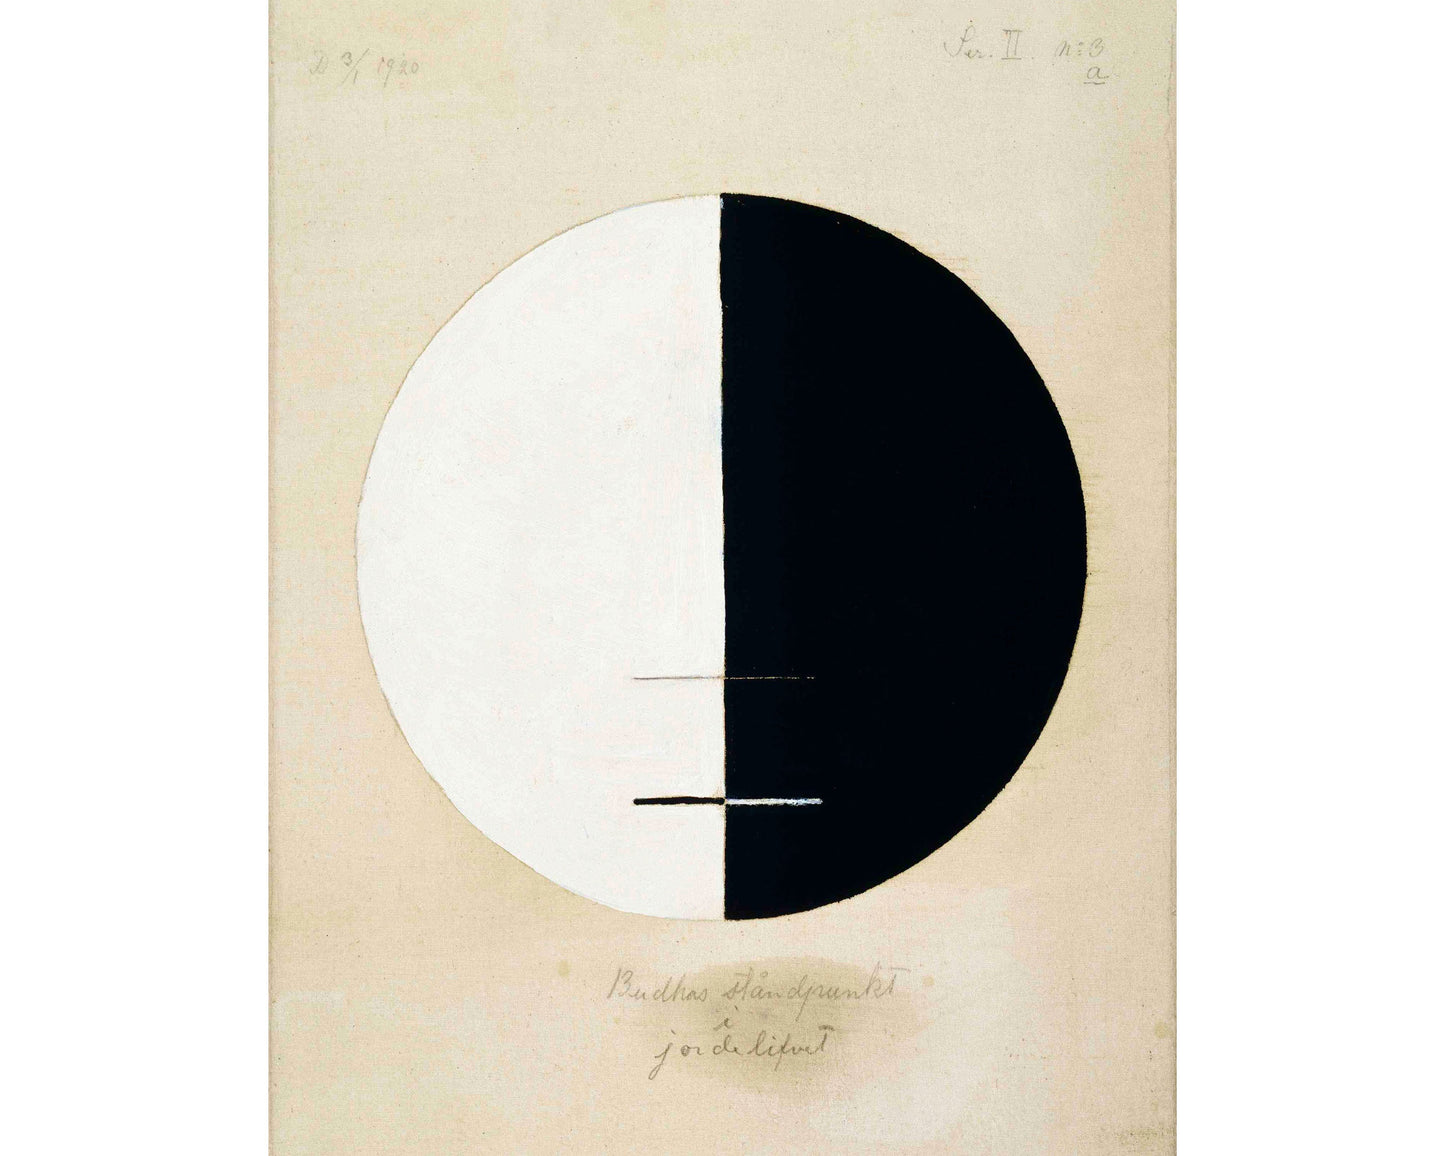 Vintage Hilma af Klint abstract art | Buddha's Standpoint in the Earthly Life | Feminist art | Minimalist wall art